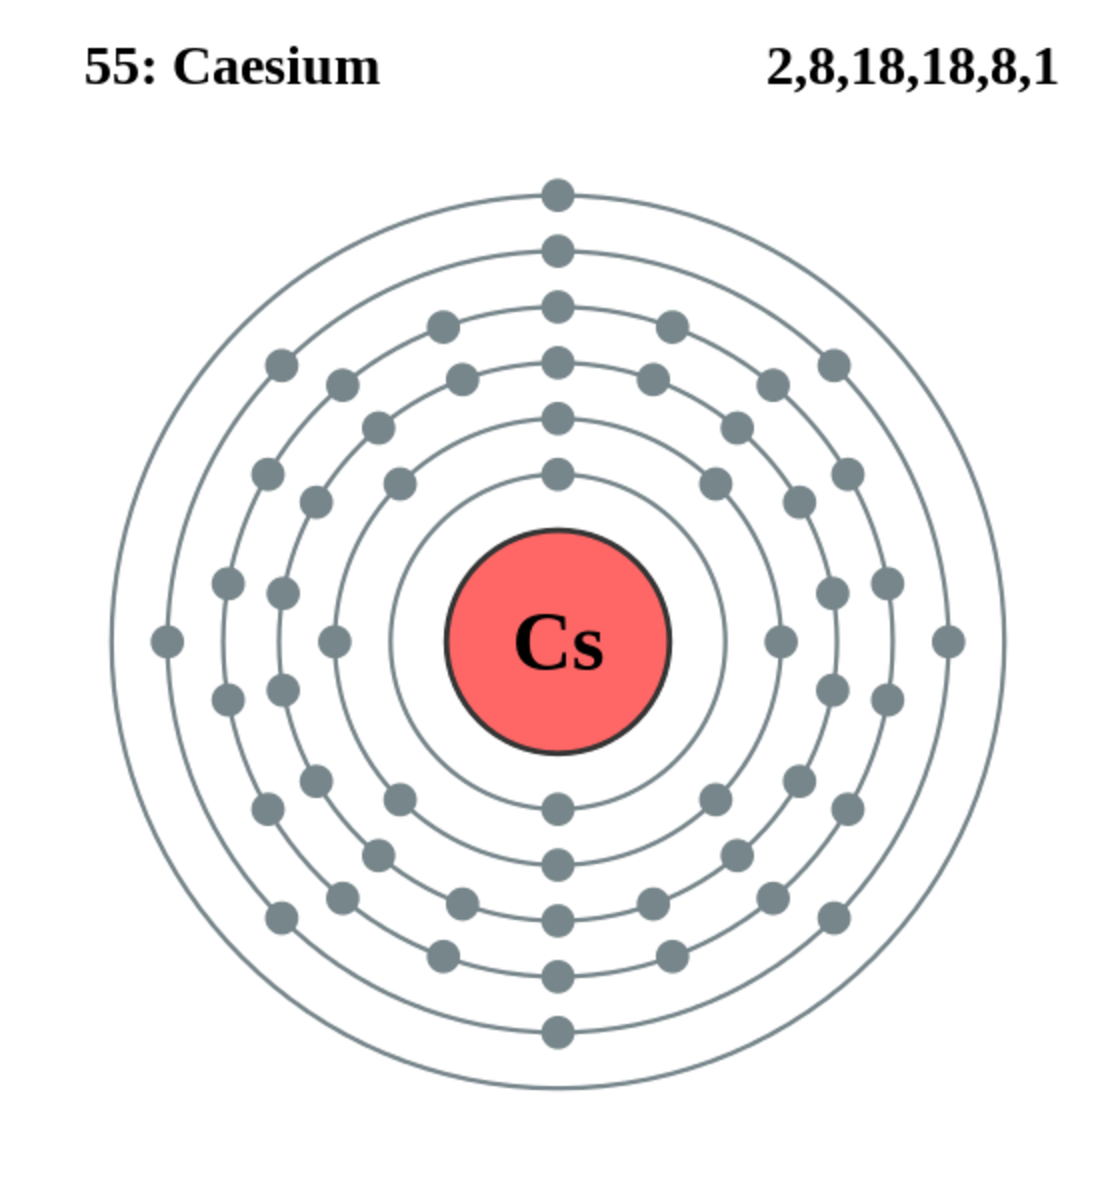 By Pumbaa (original work by Greg Robson) (File:Electron shell 055 caesium.png) [CC BY-SA 2.0 uk], via Wikimedia Commons